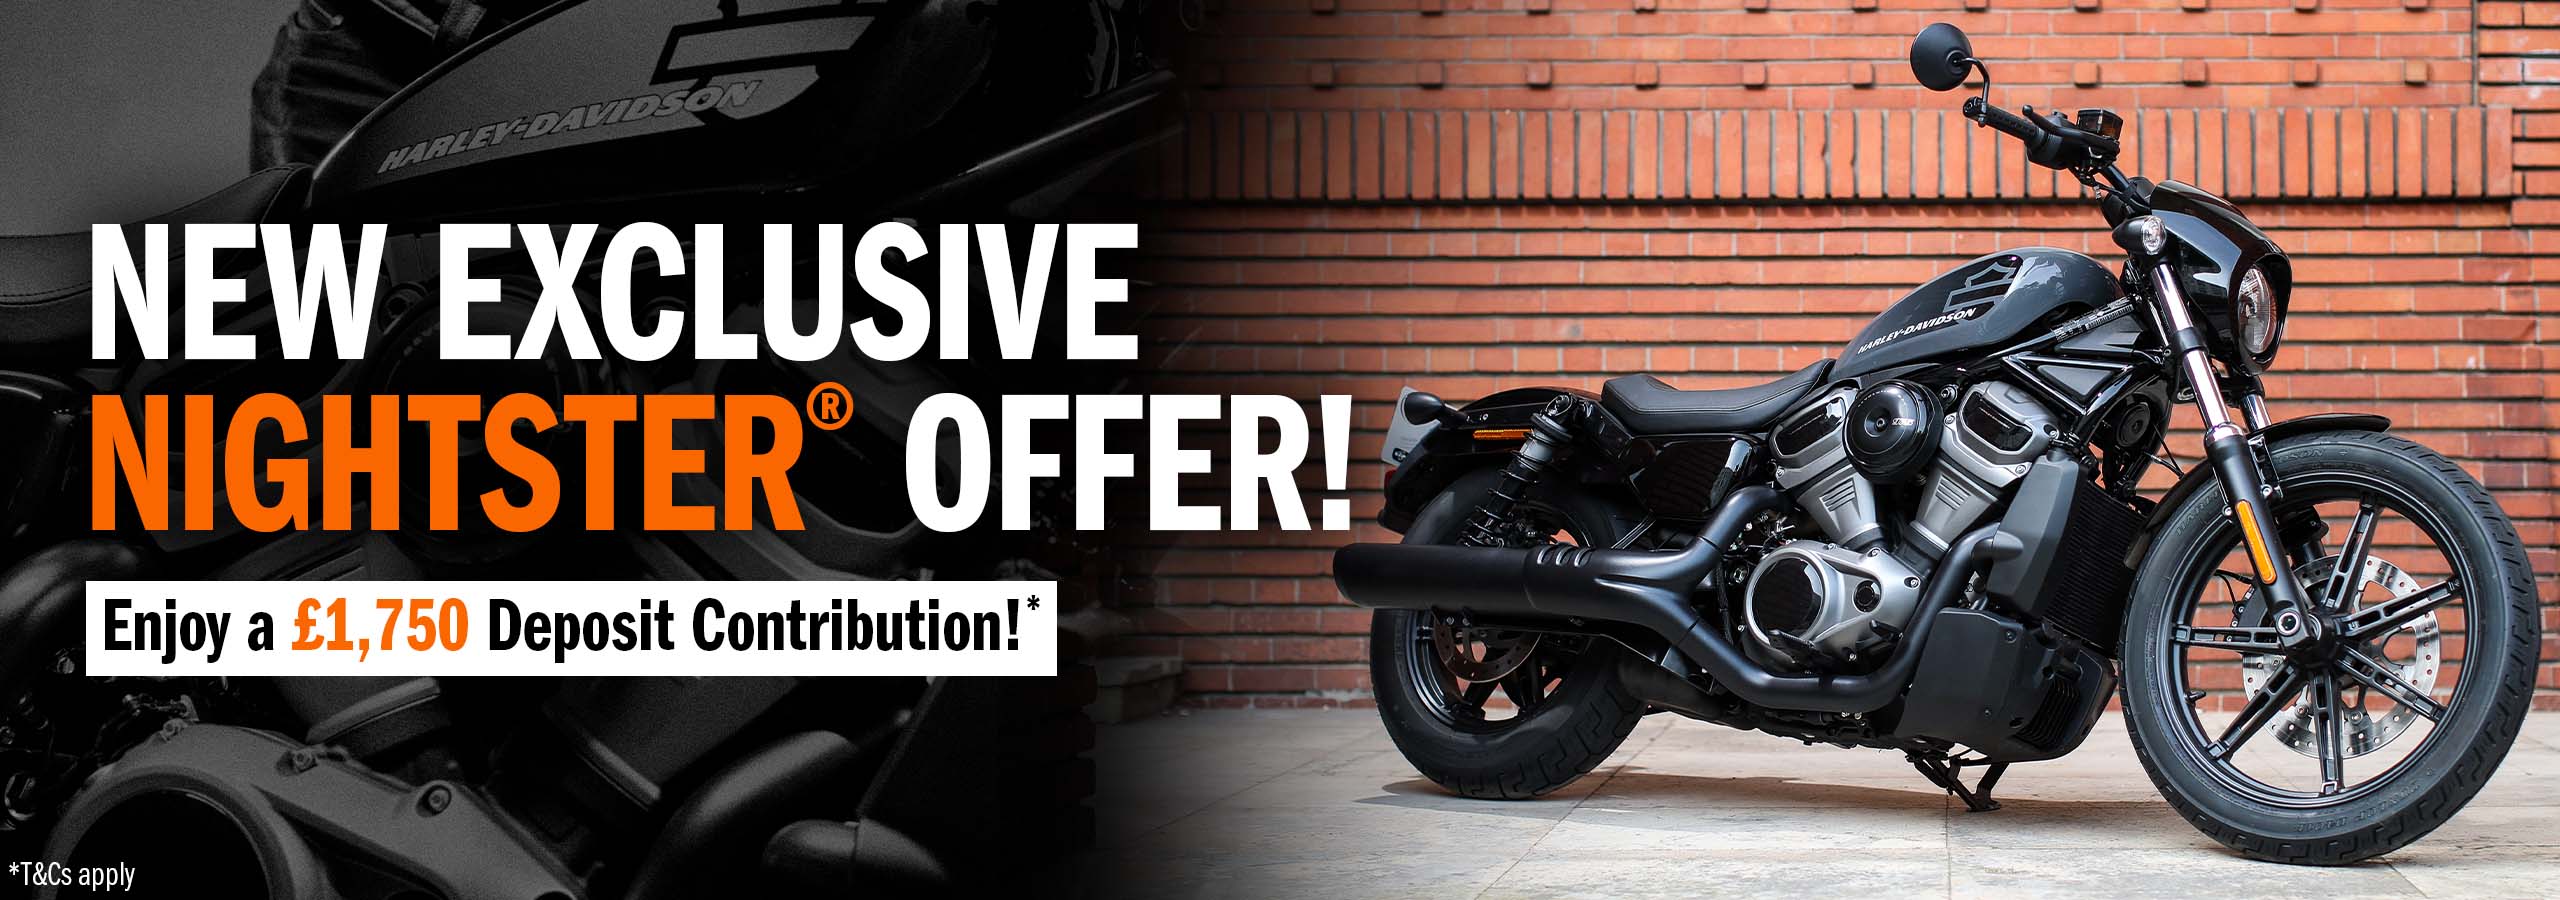 New Maidstone Exclusive Nightster Offer